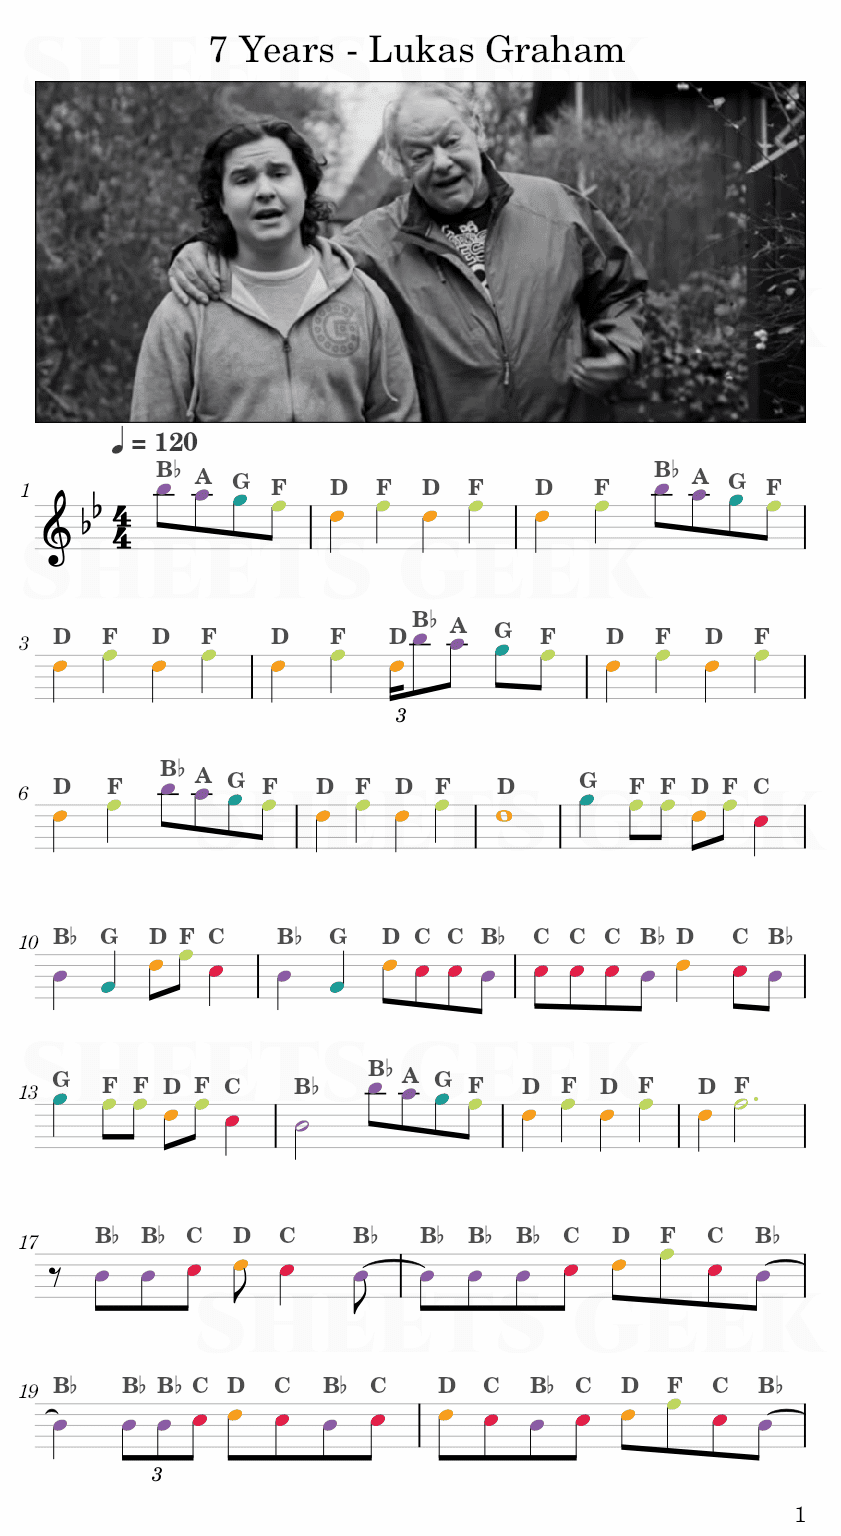 7 Years - Lukas Graham Easy Sheet Music Free for piano, keyboard, flute, violin, sax, cello page 1